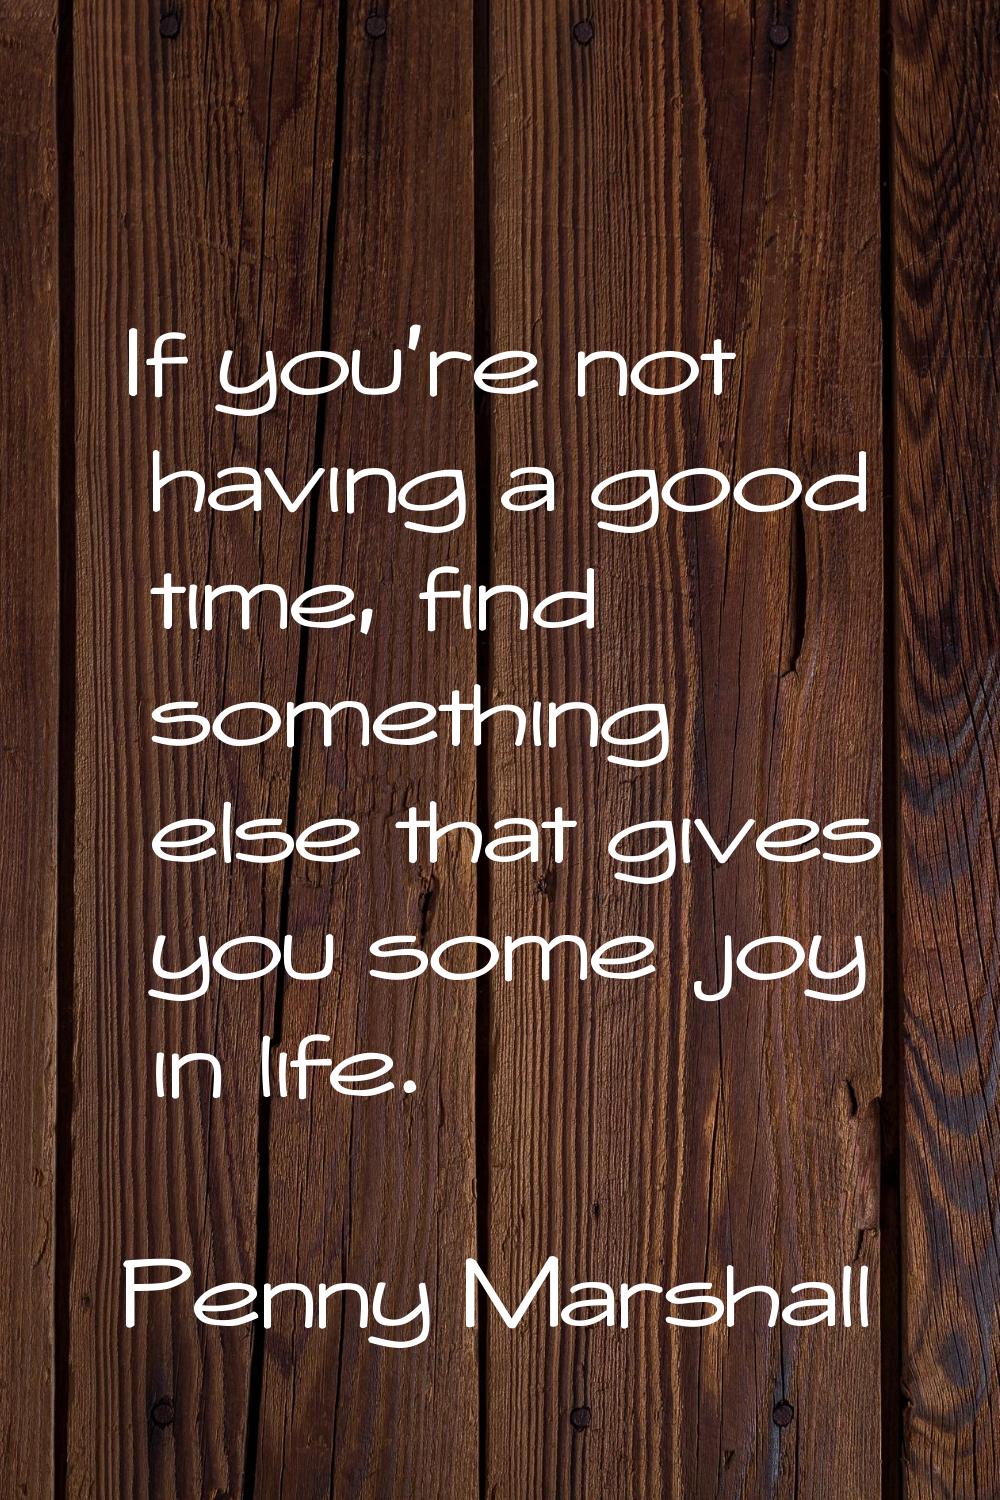 If you're not having a good time, find something else that gives you some joy in life.